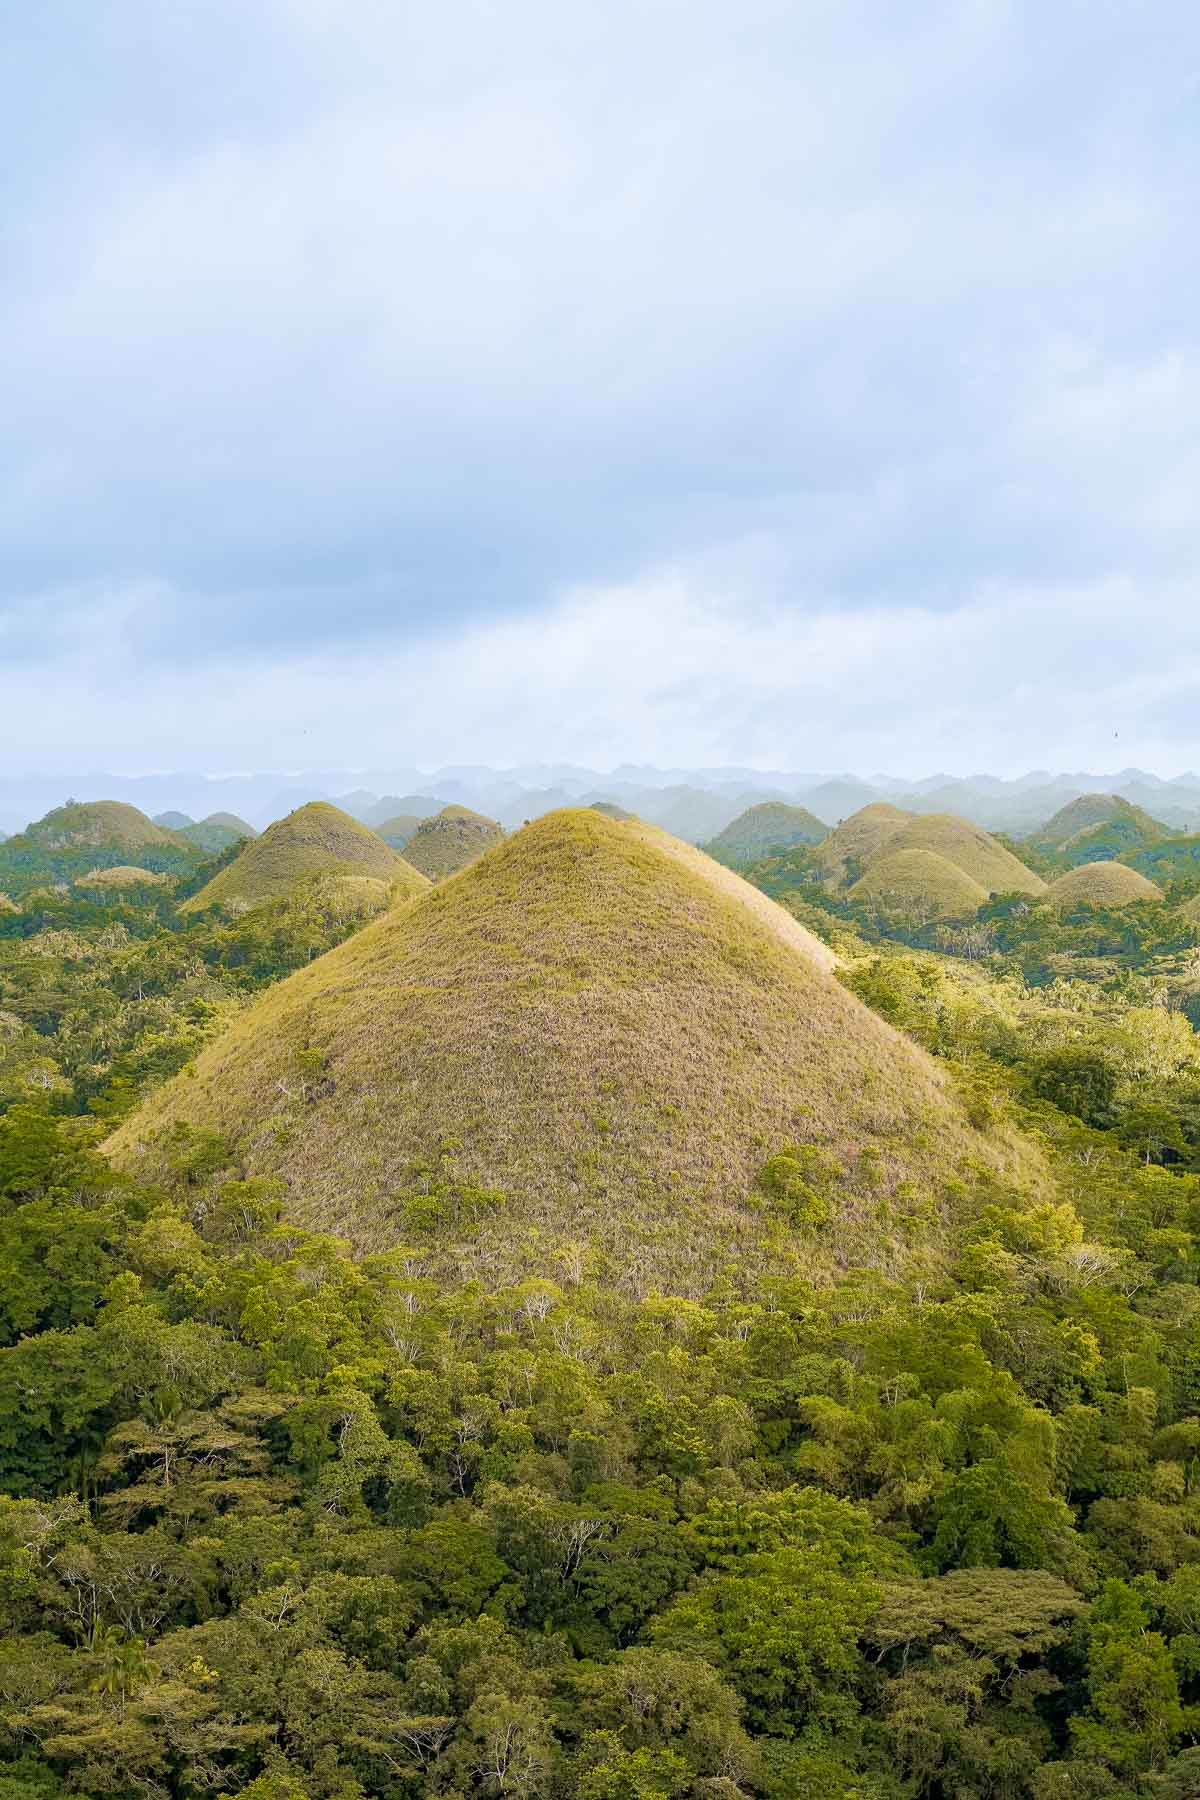 Chocolate Hills in Bohol, Philippines